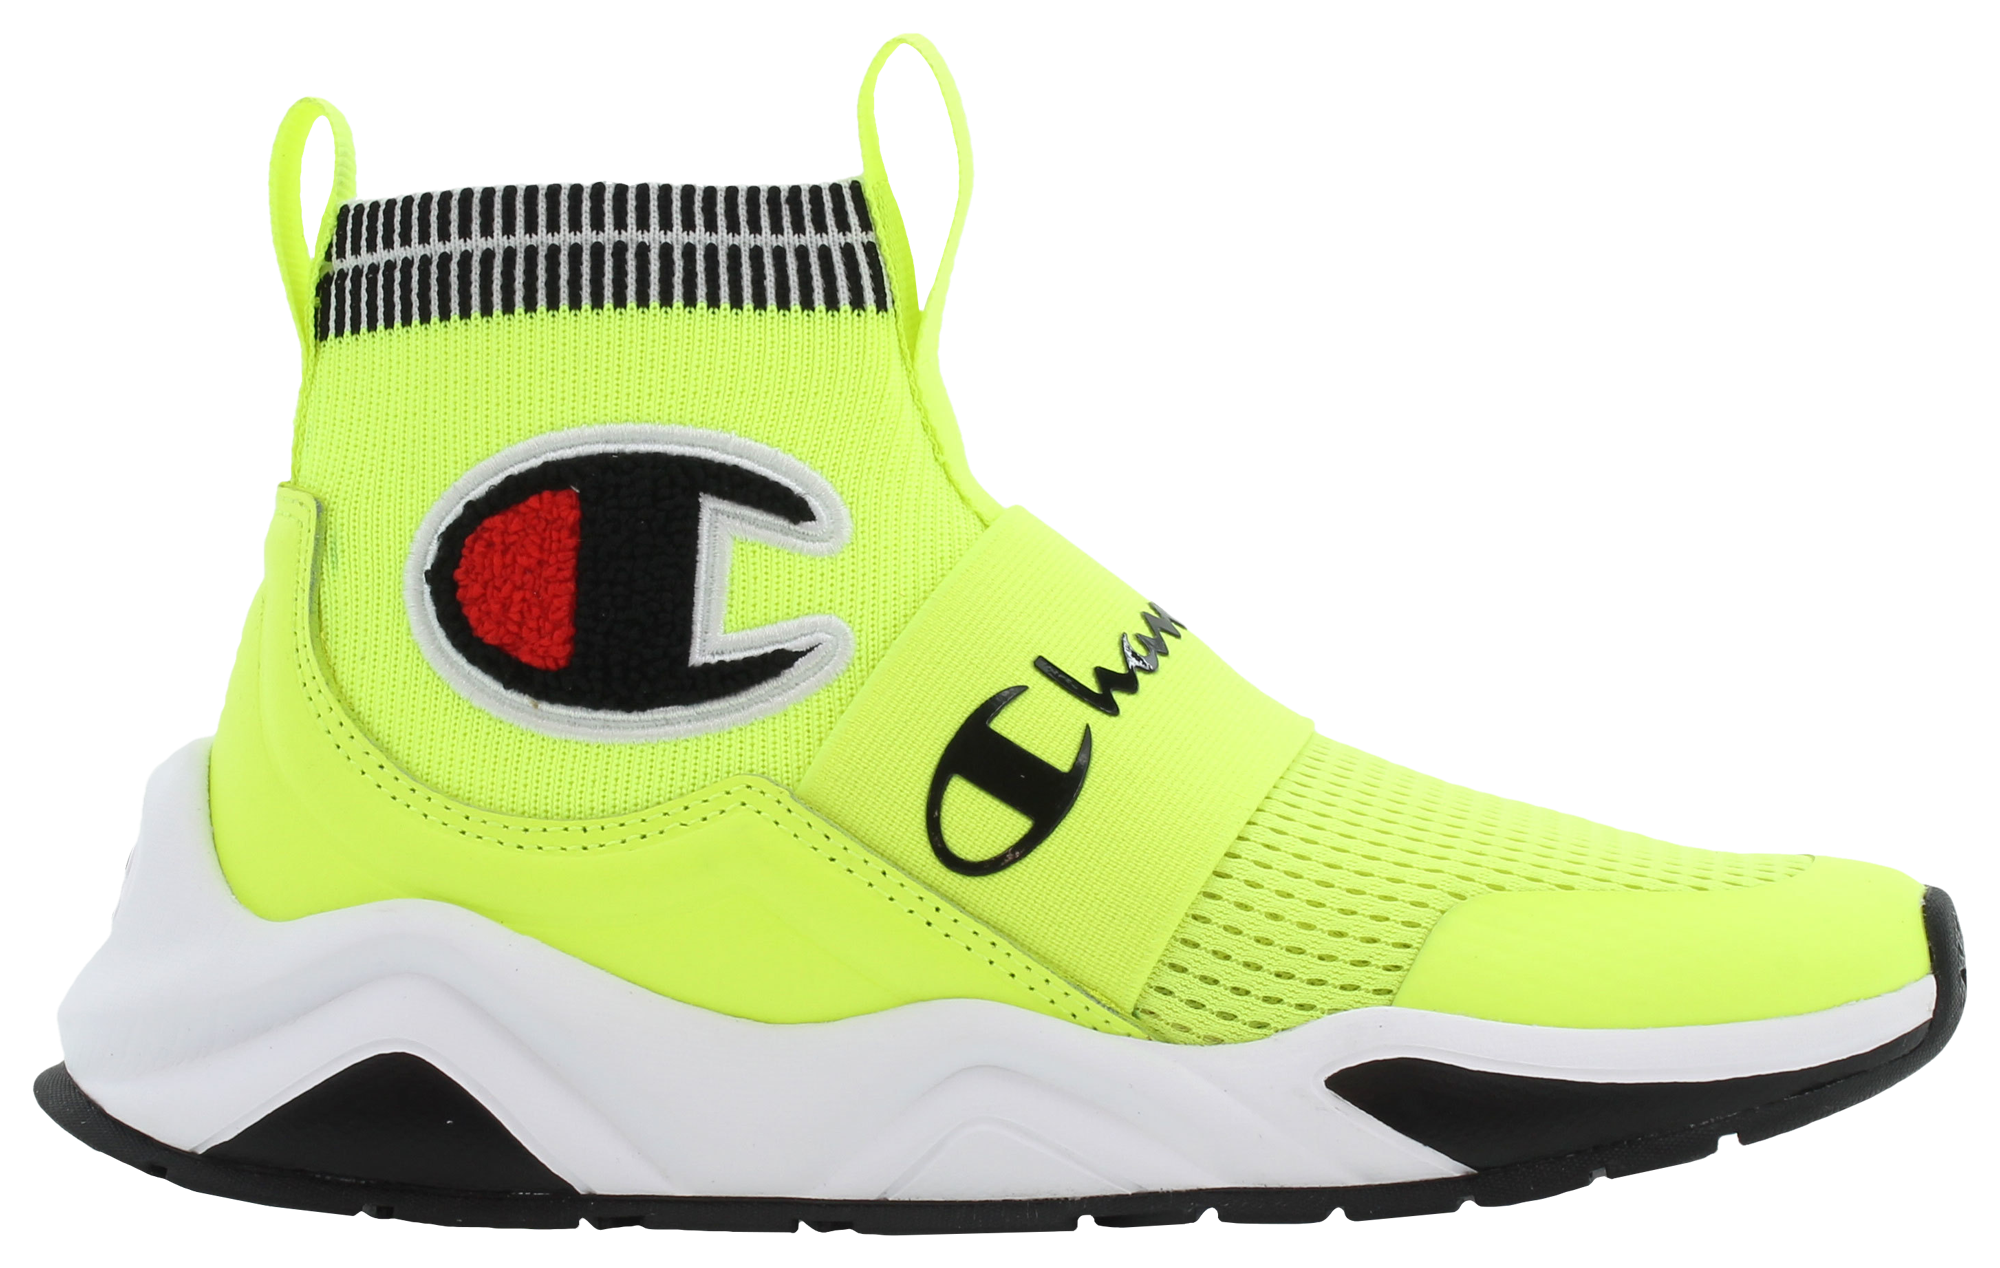 champion toddler shoes canada